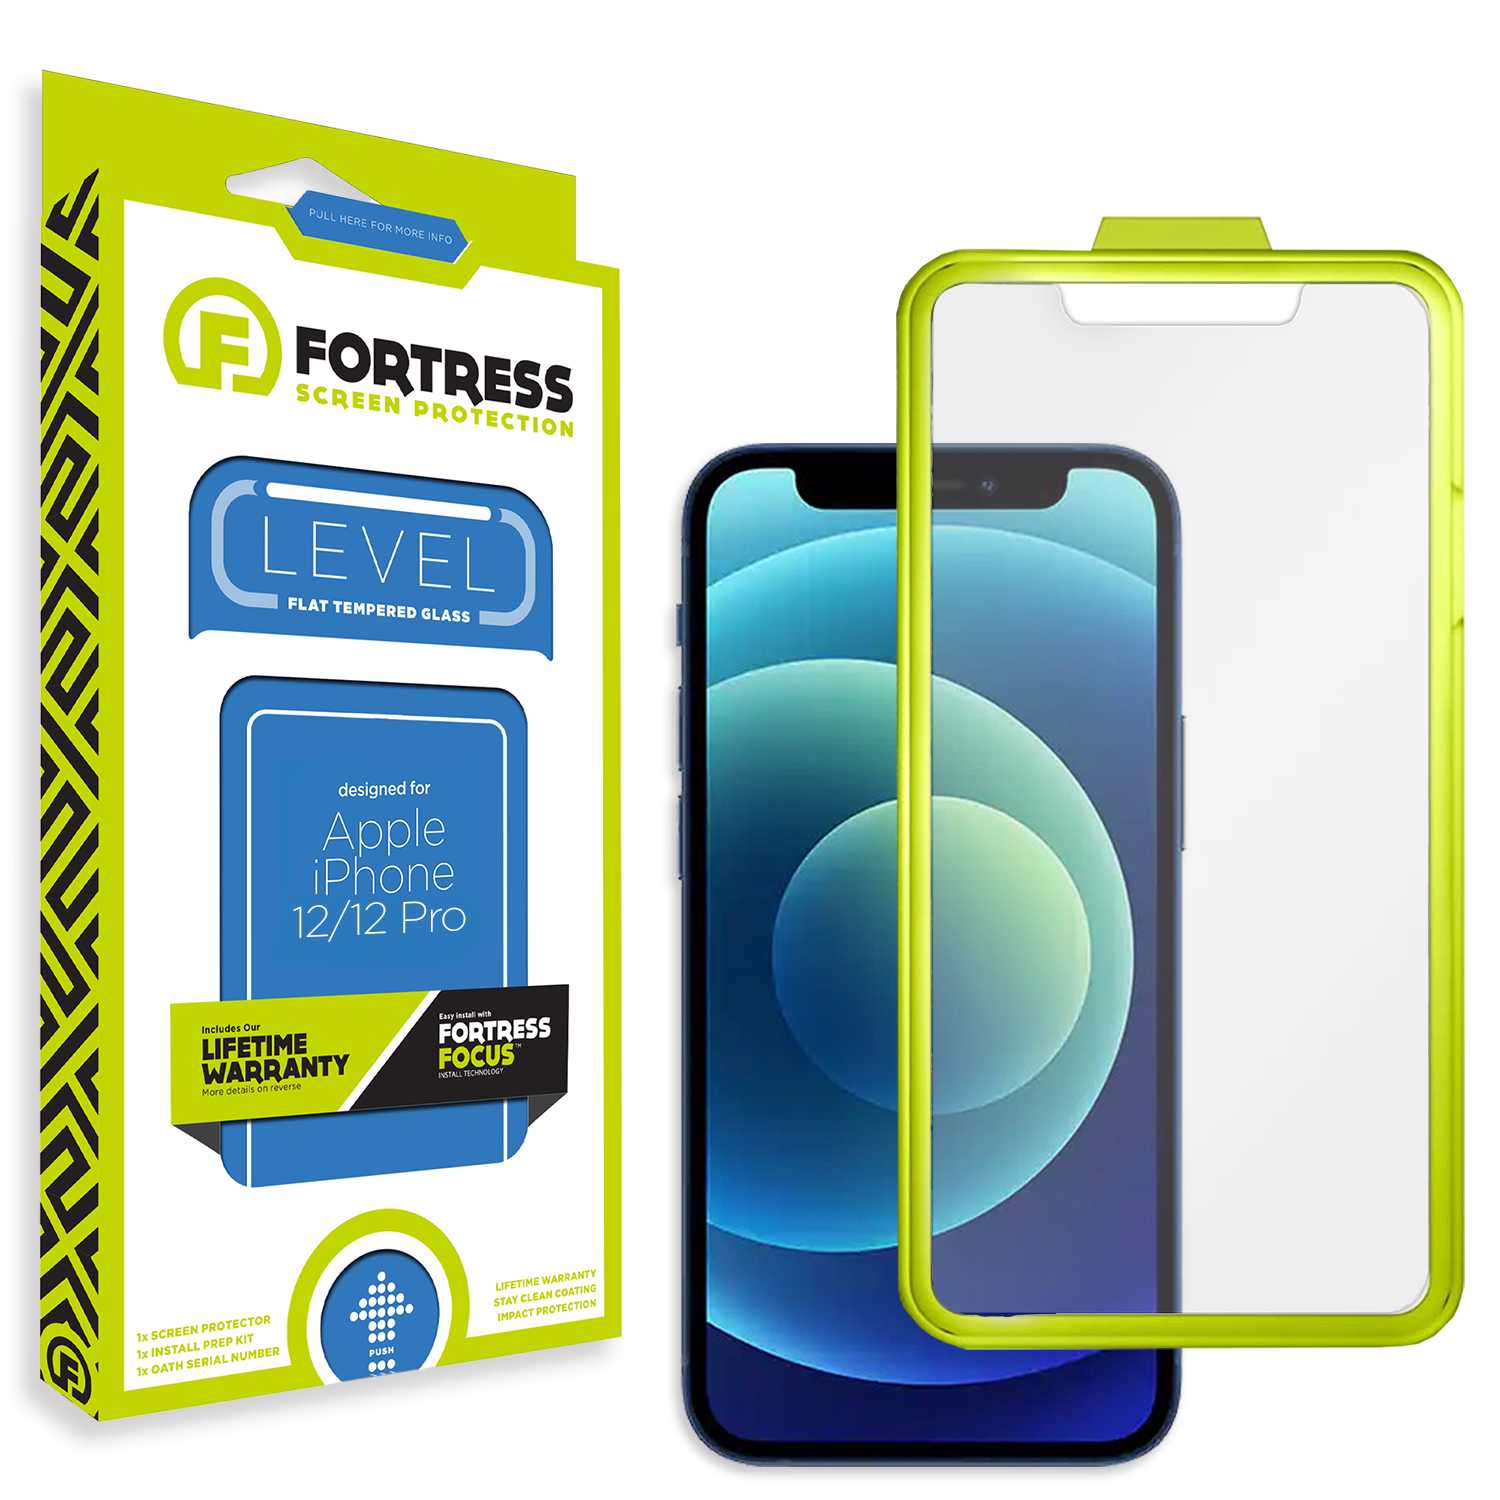 Fortress iPhone 12 Pro Screen Protector $0CoverageInstallTool Scooch Screen Protector